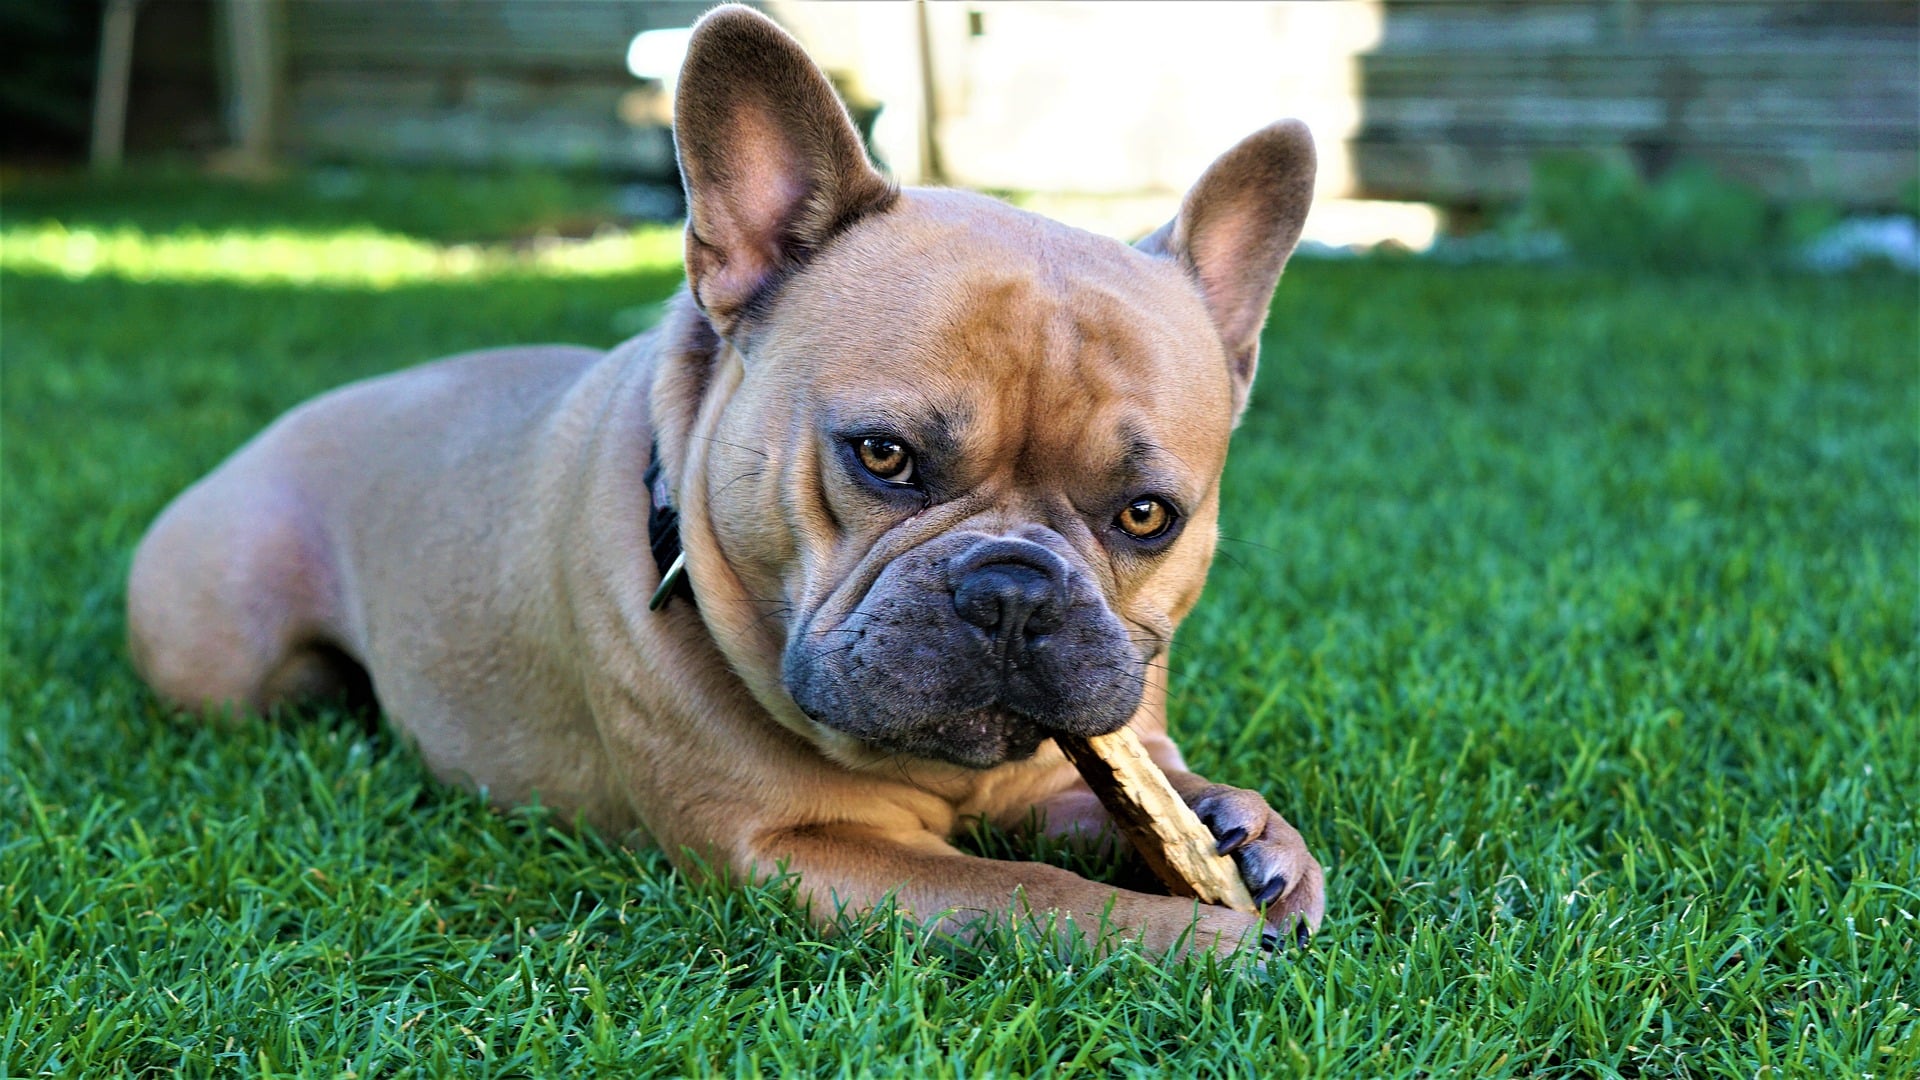 French bulldog chewing on bone outside in green grass